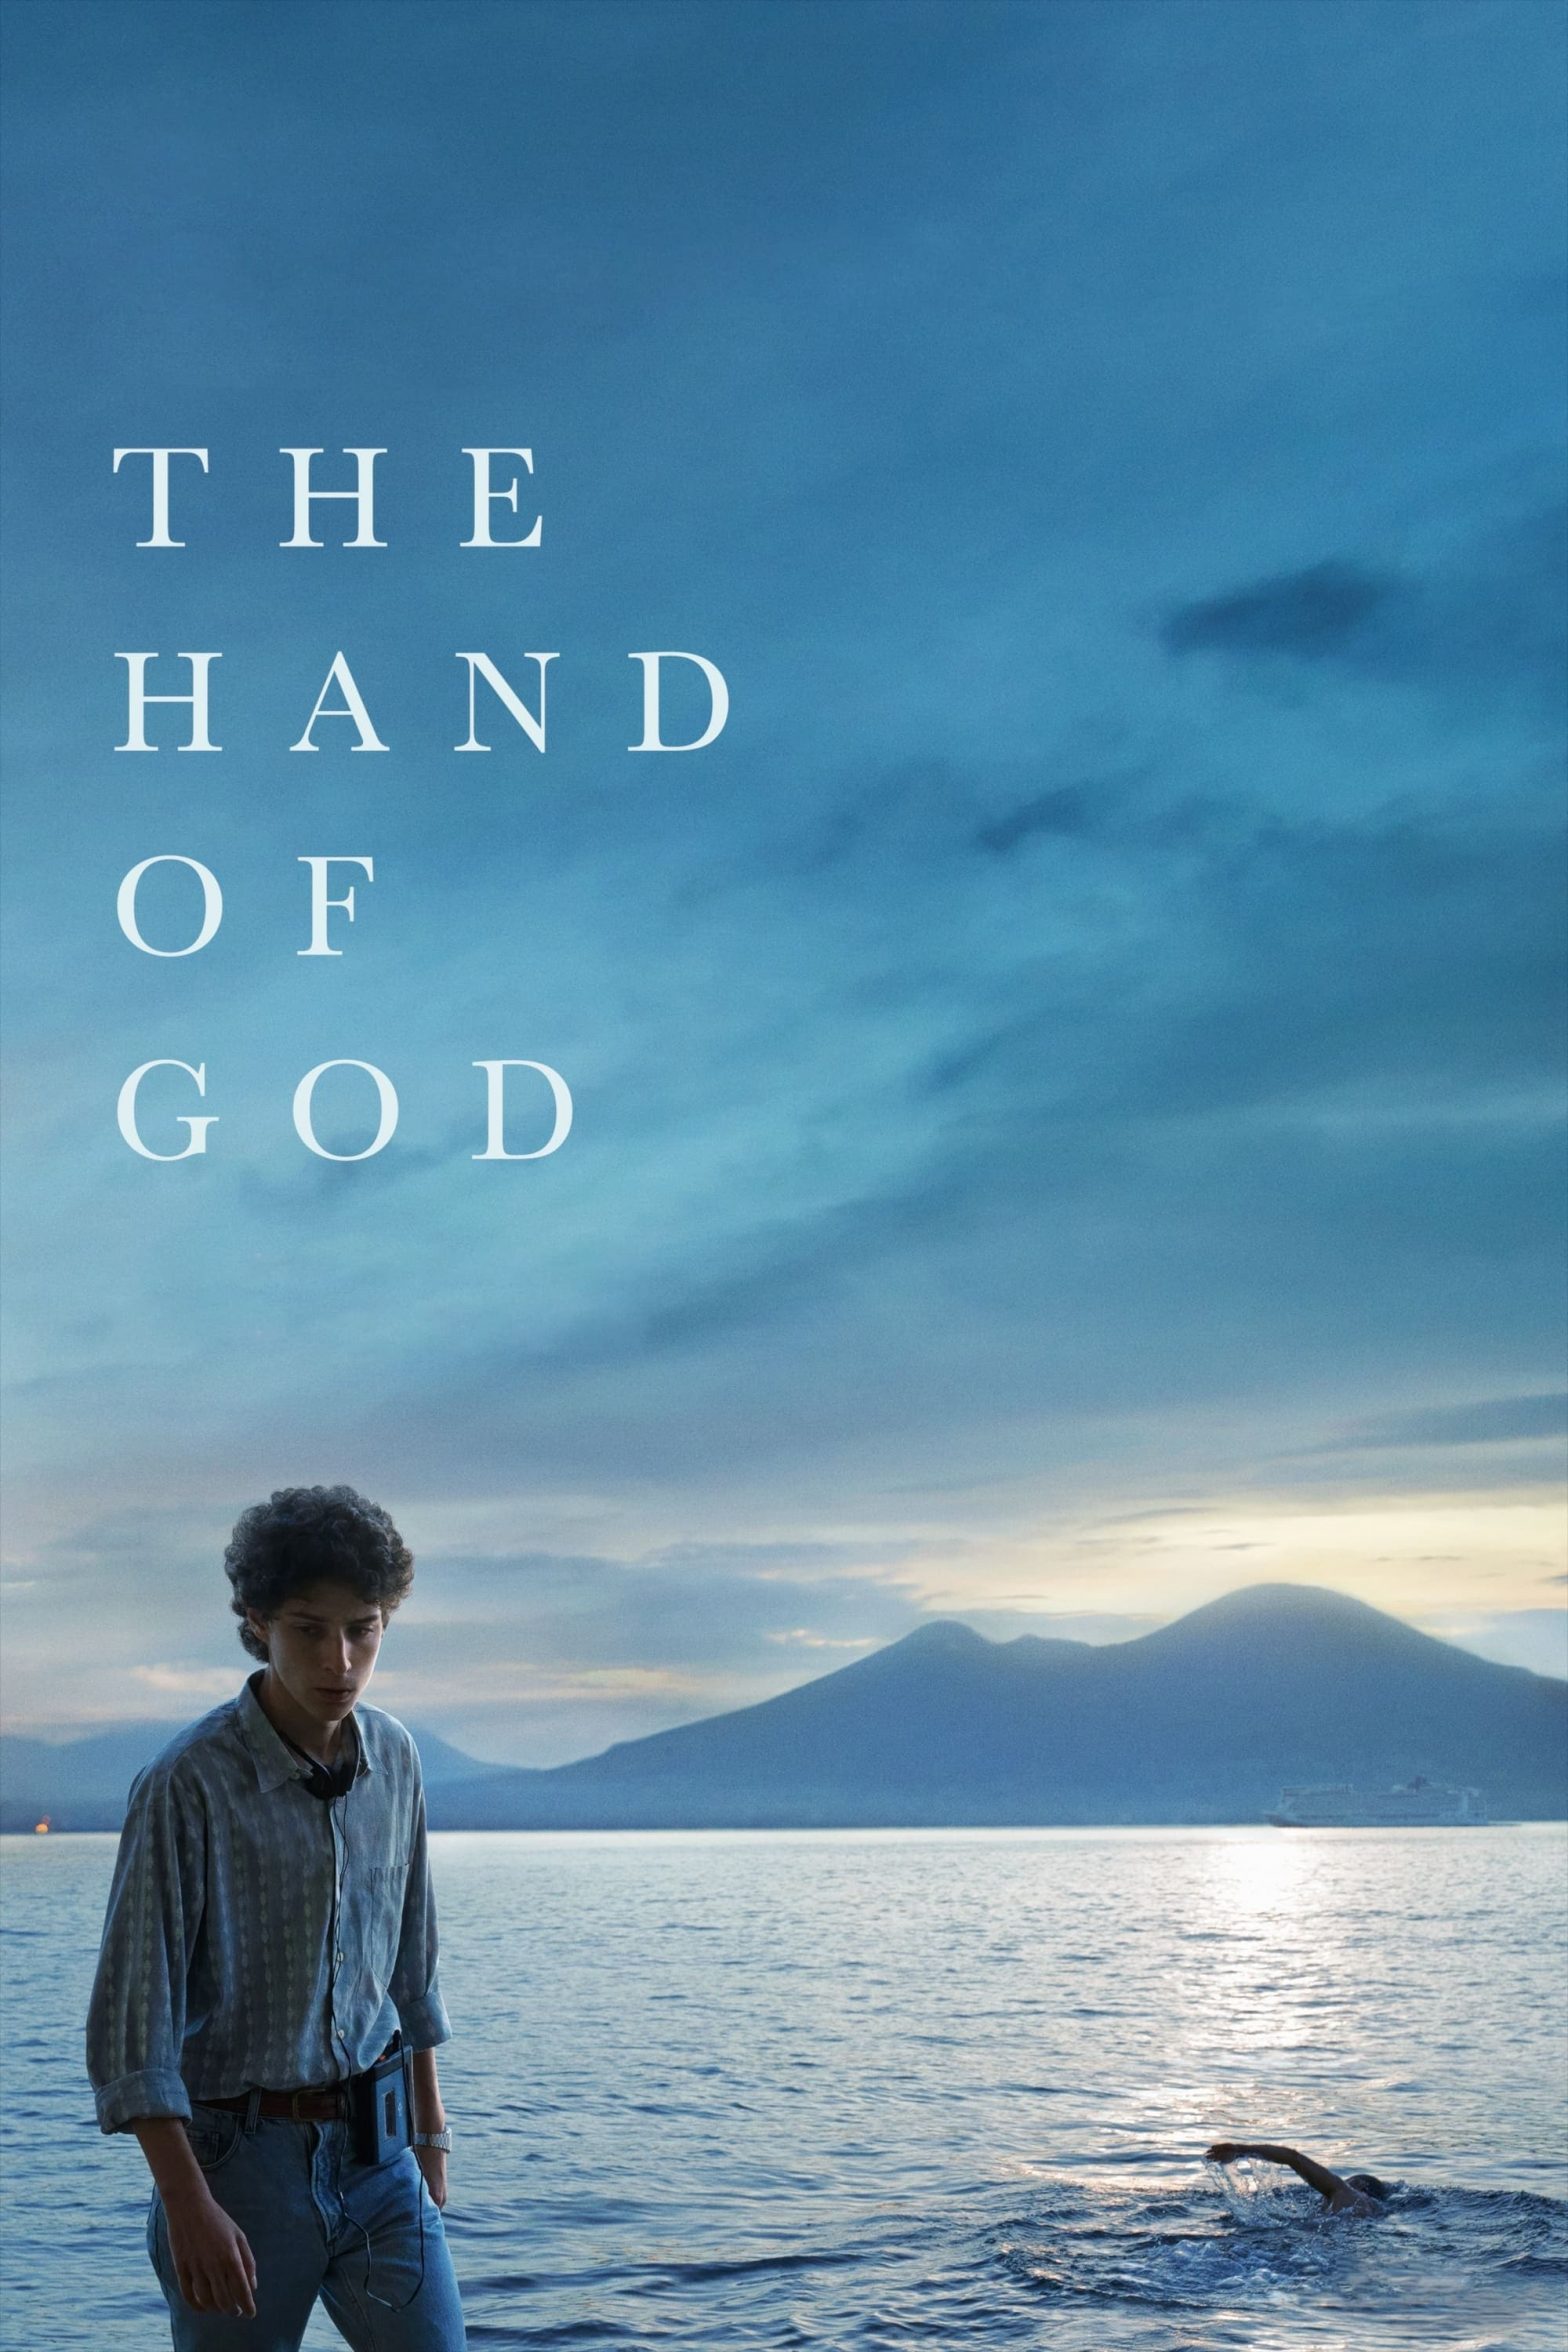 Poster for the movie "The Hand of God"